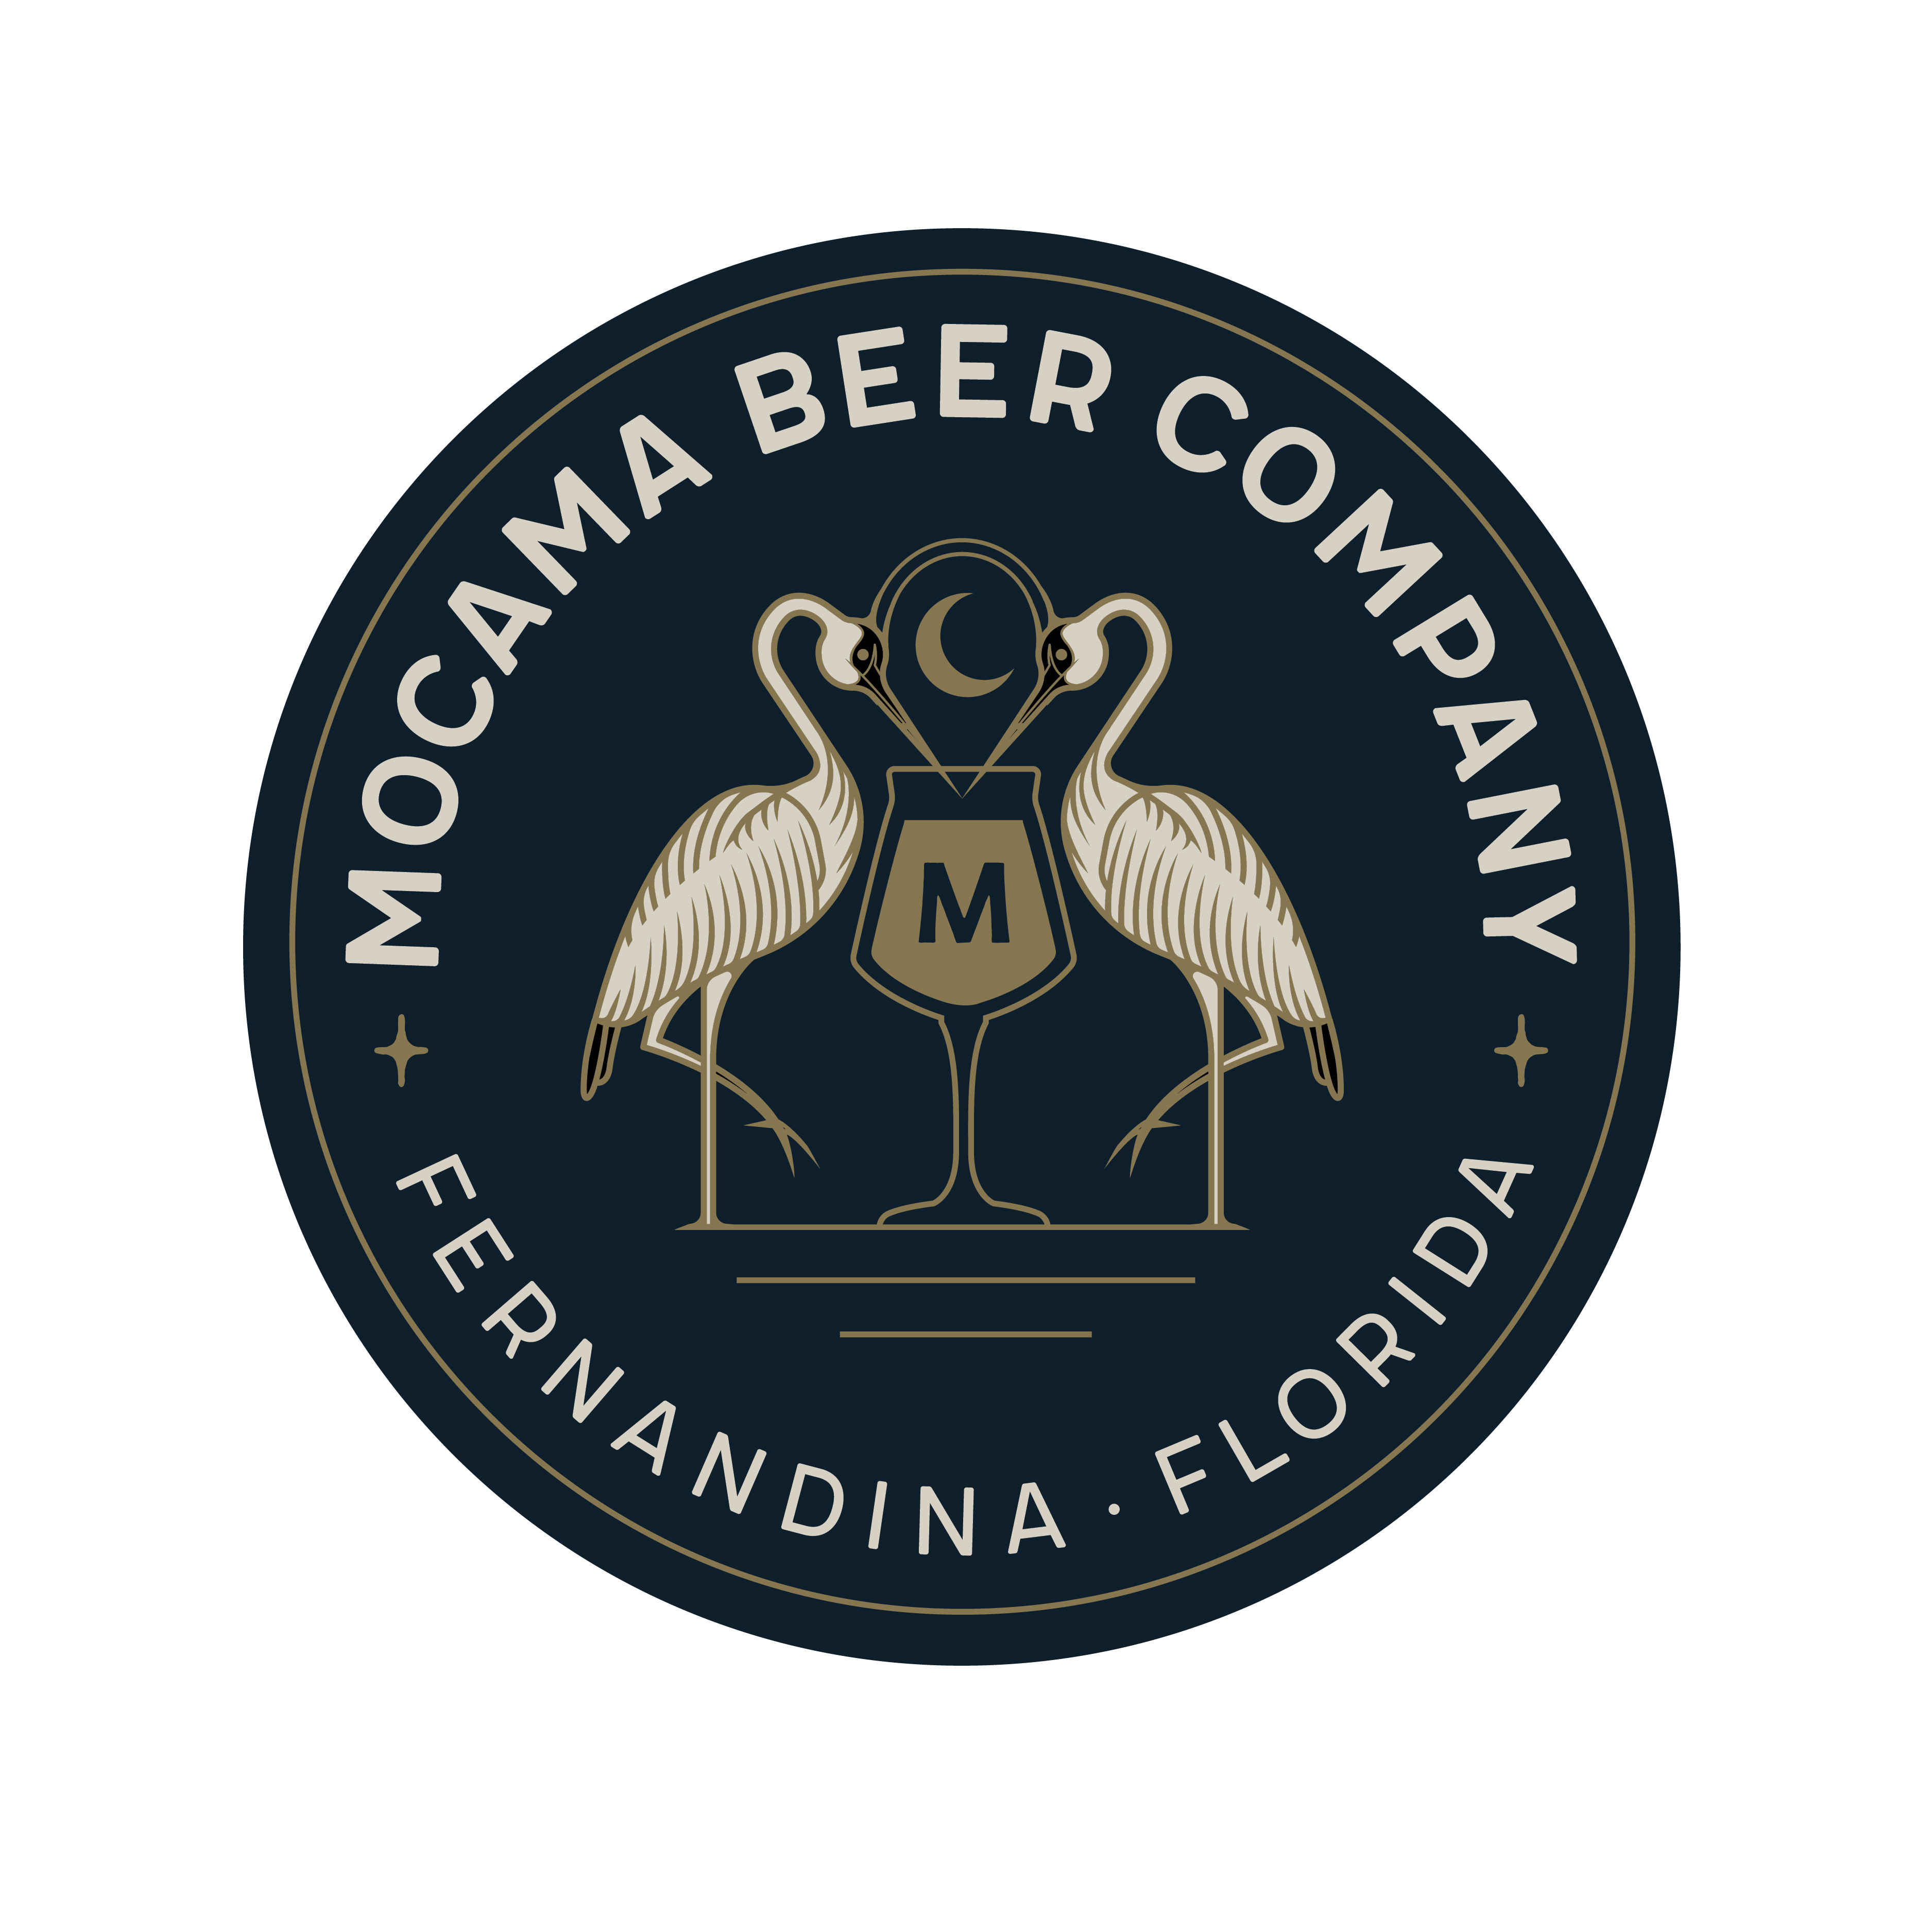 Mocama Beer Company  logo design by logo designer Steely Works for your inspiration and for the worlds largest logo competition